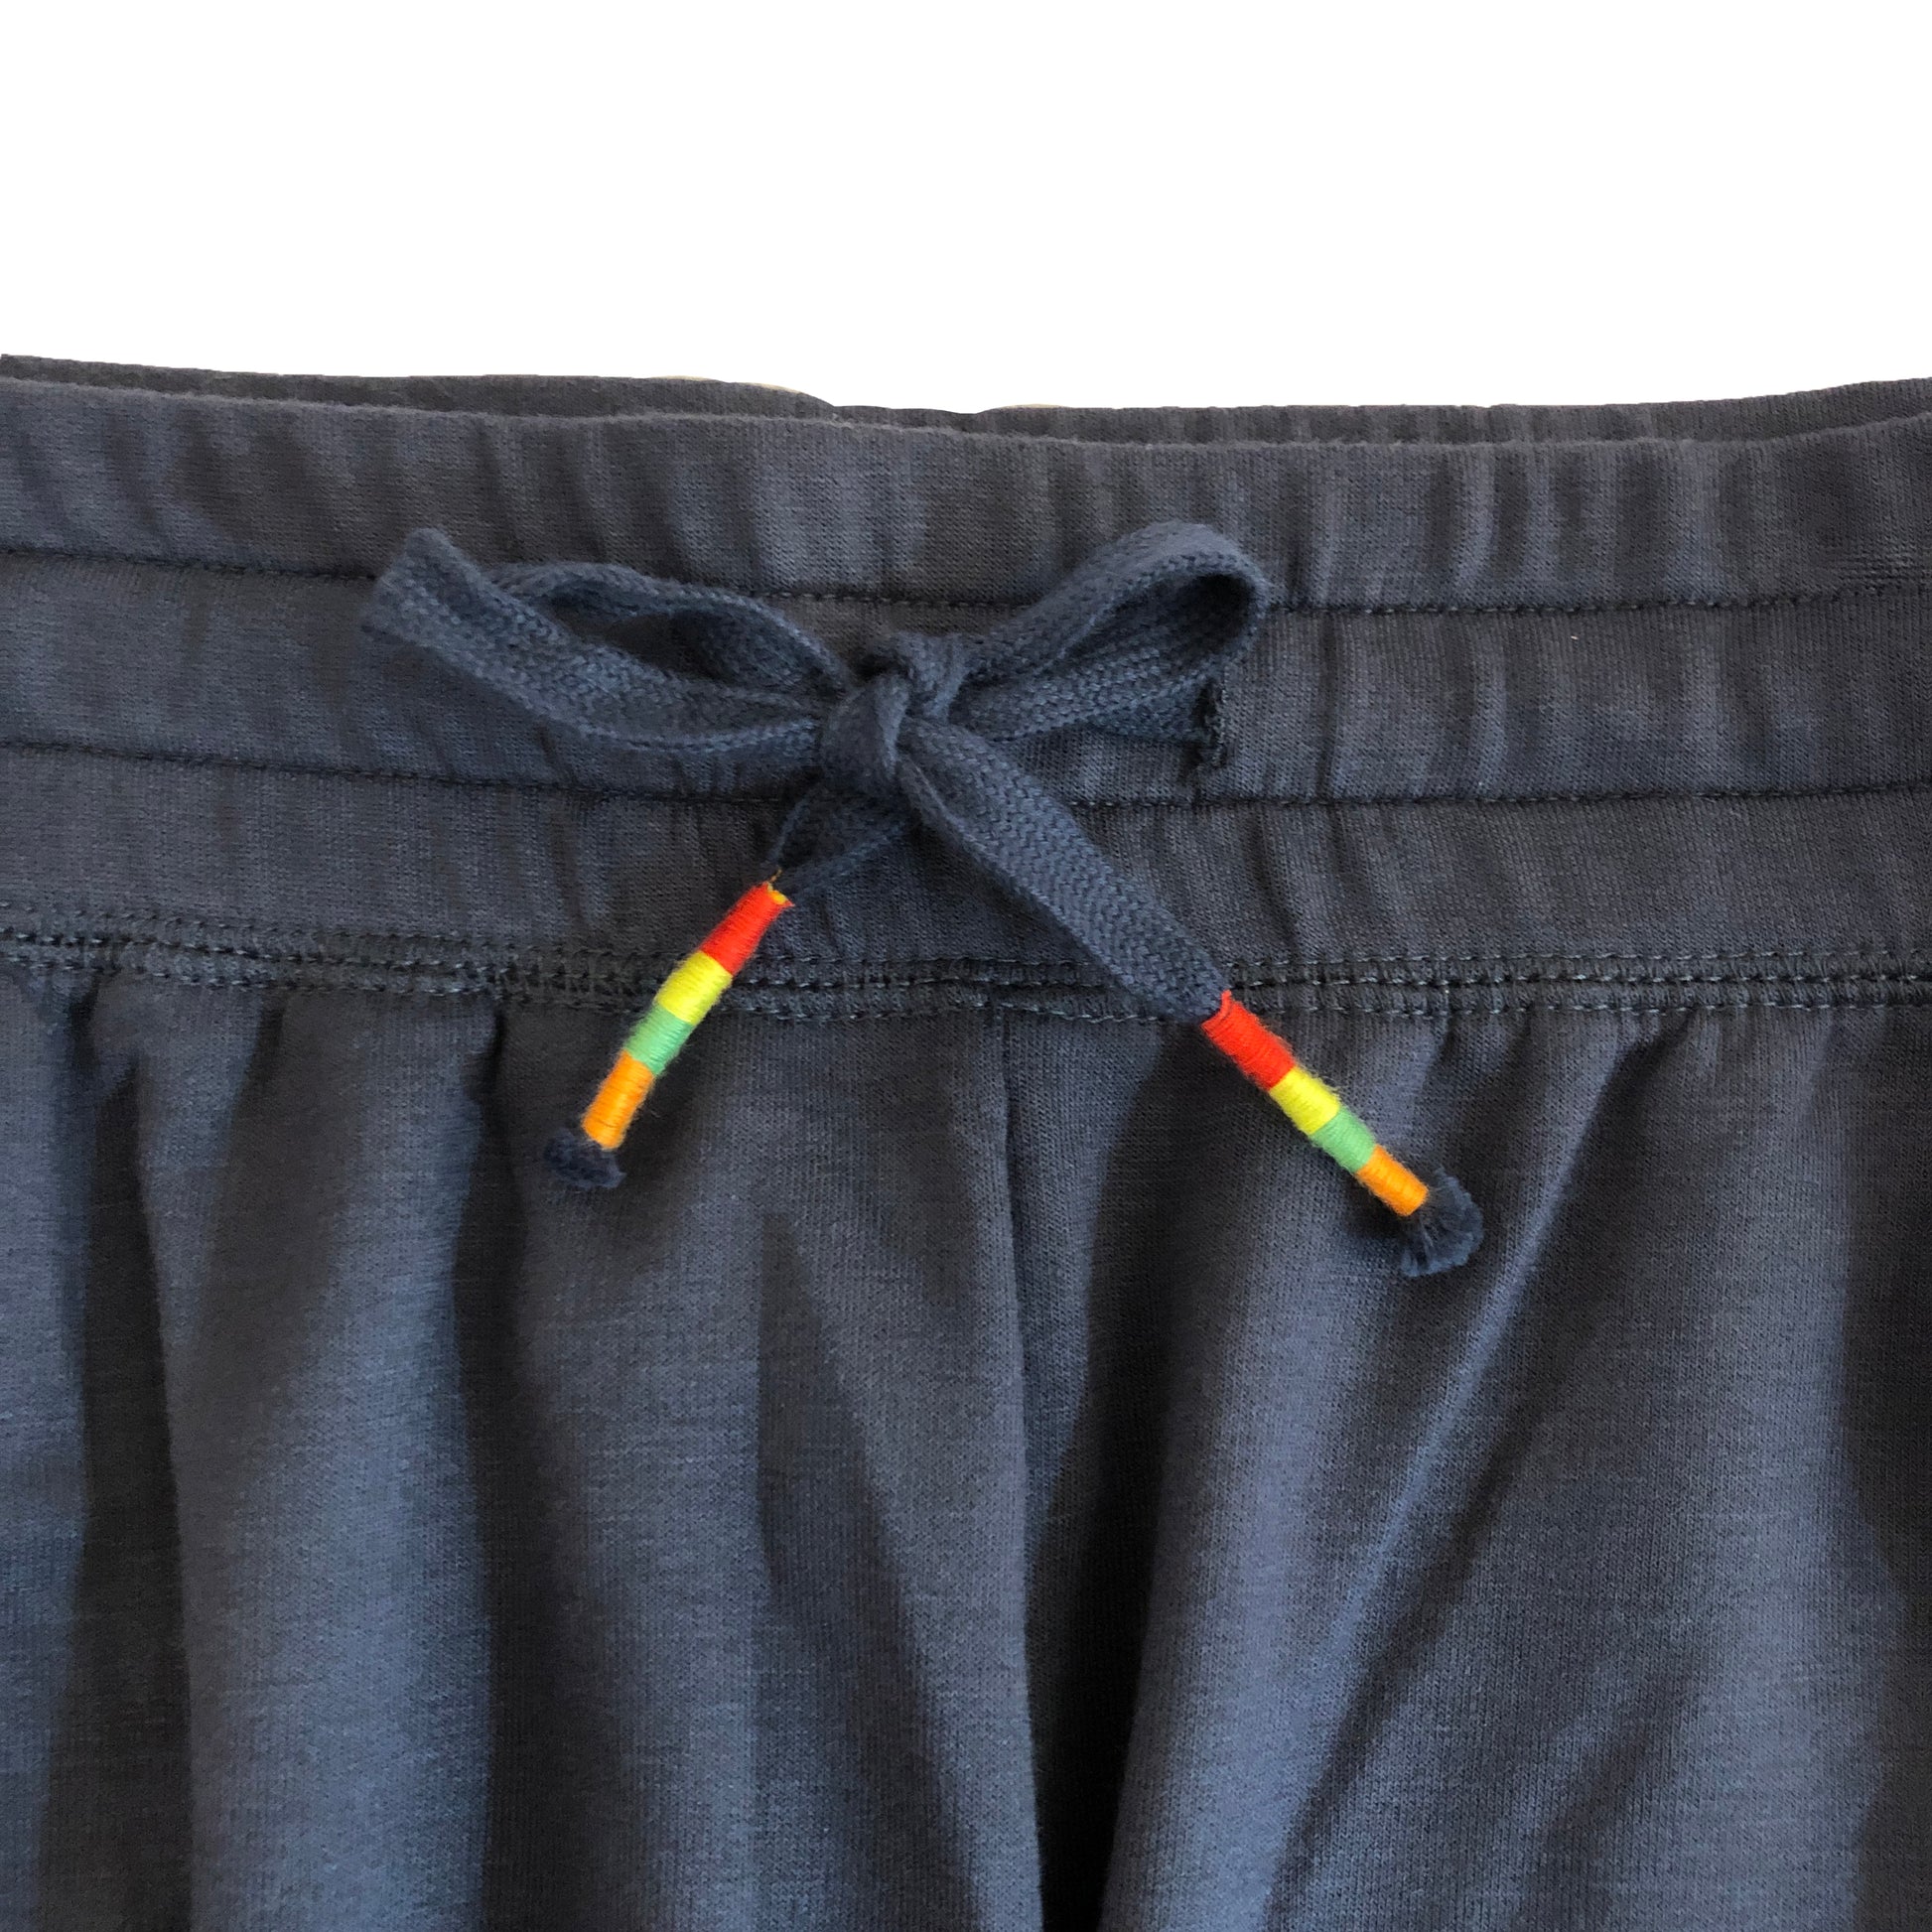 closeup detail of drawstring with rainbow stripe accent